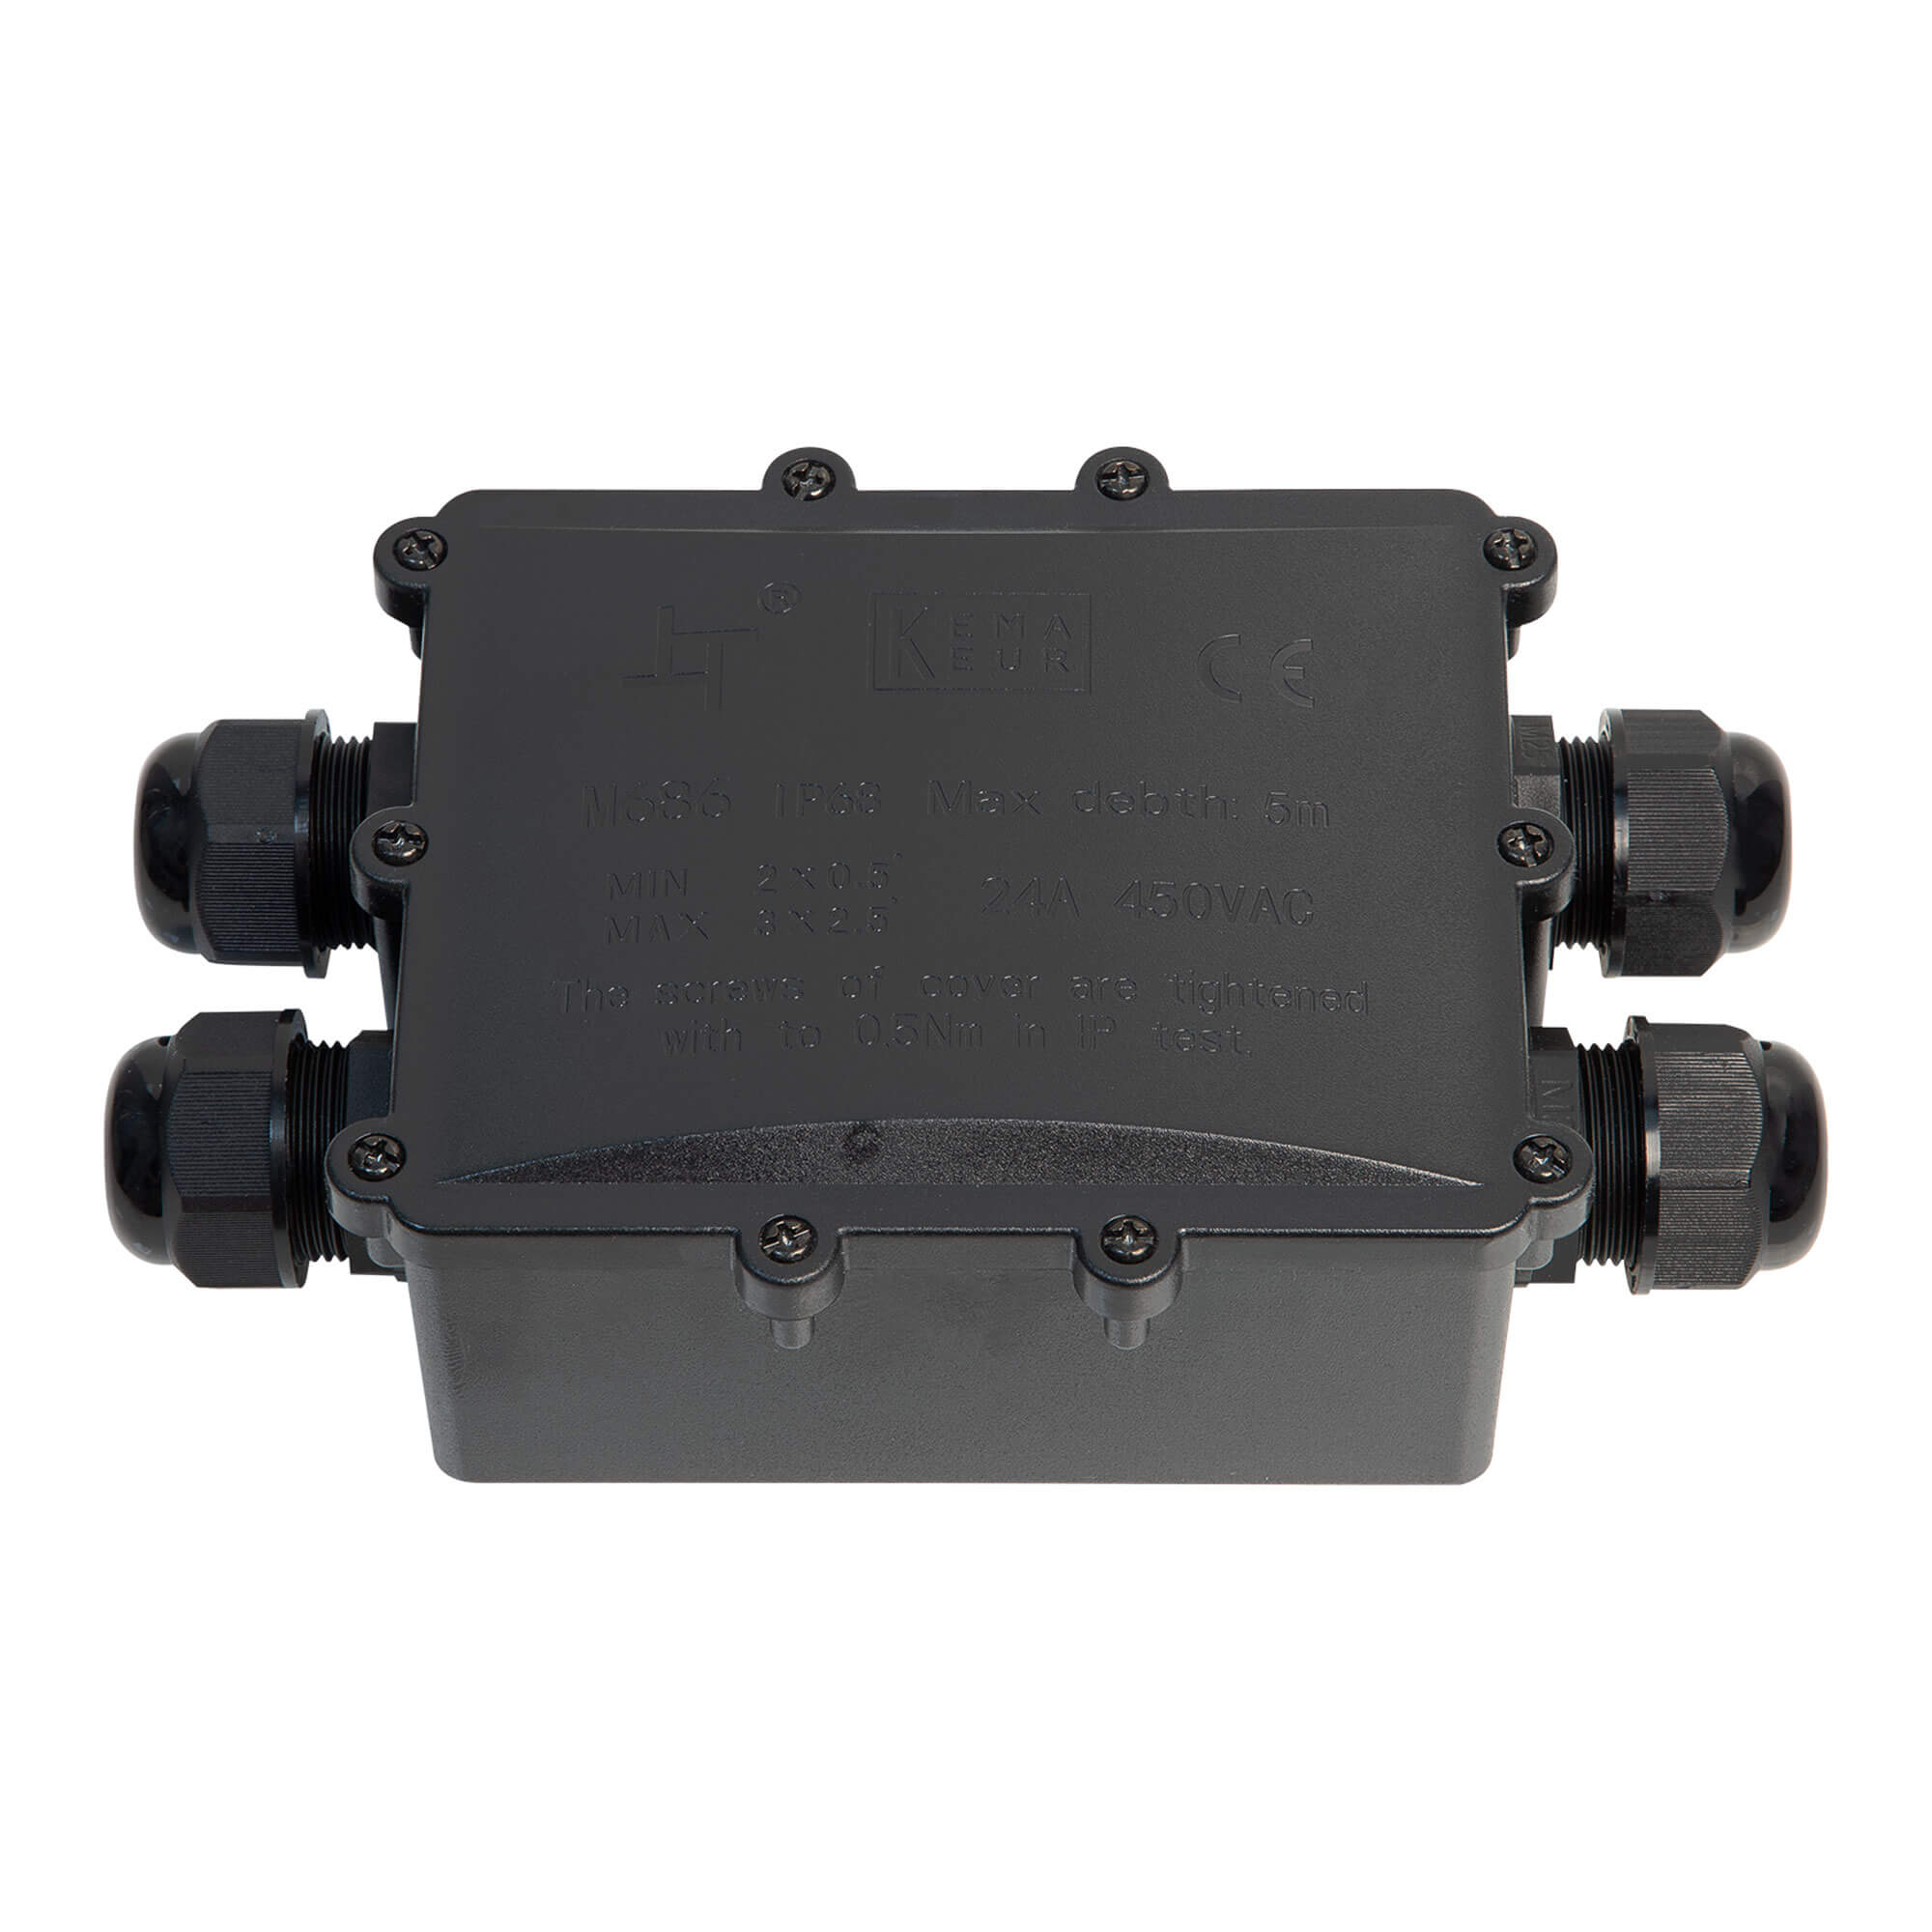 Waterproof connection box - IP68 - Large - 4-Way - for 4 to 14mm cable